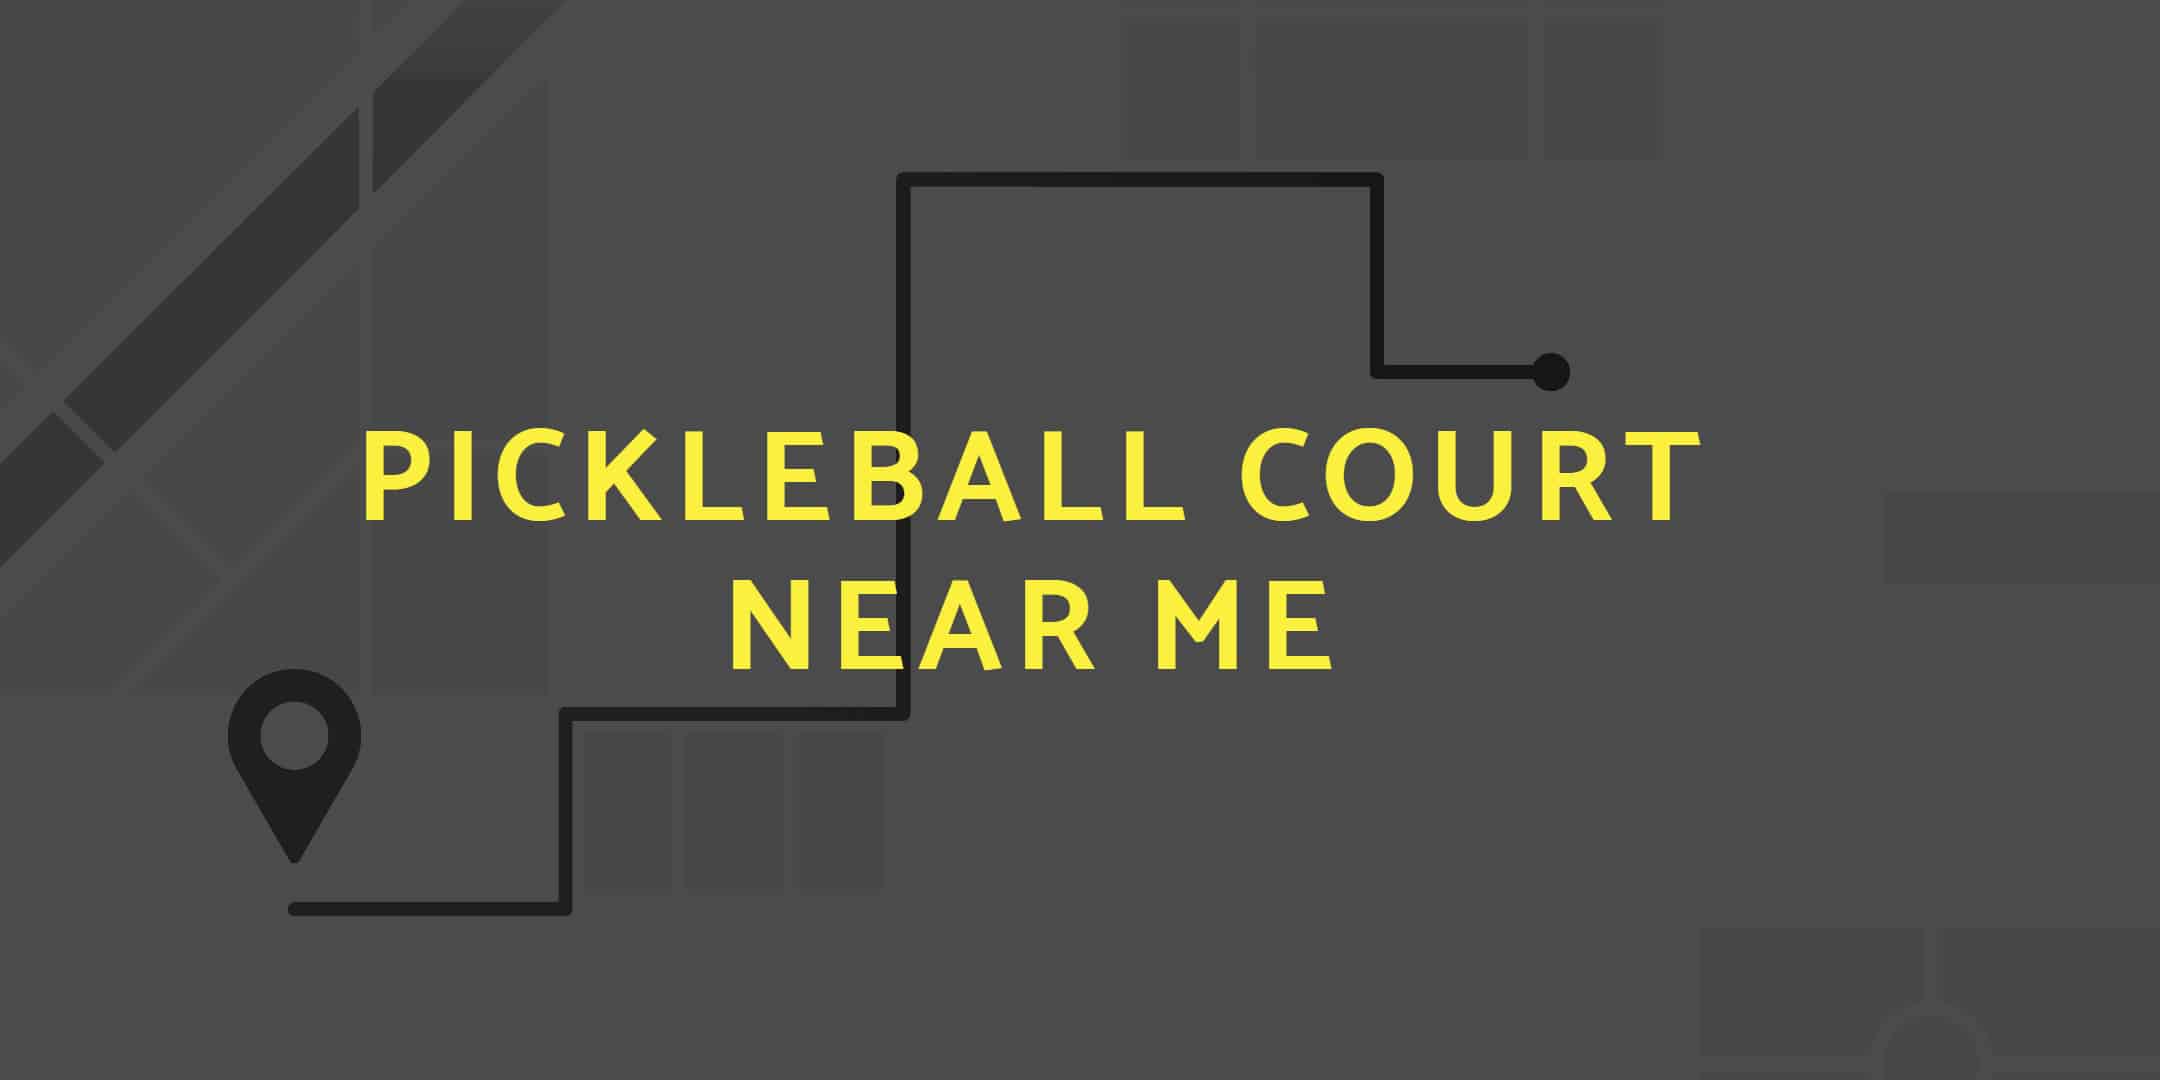 Pickleball court near me - Places to play pickleball